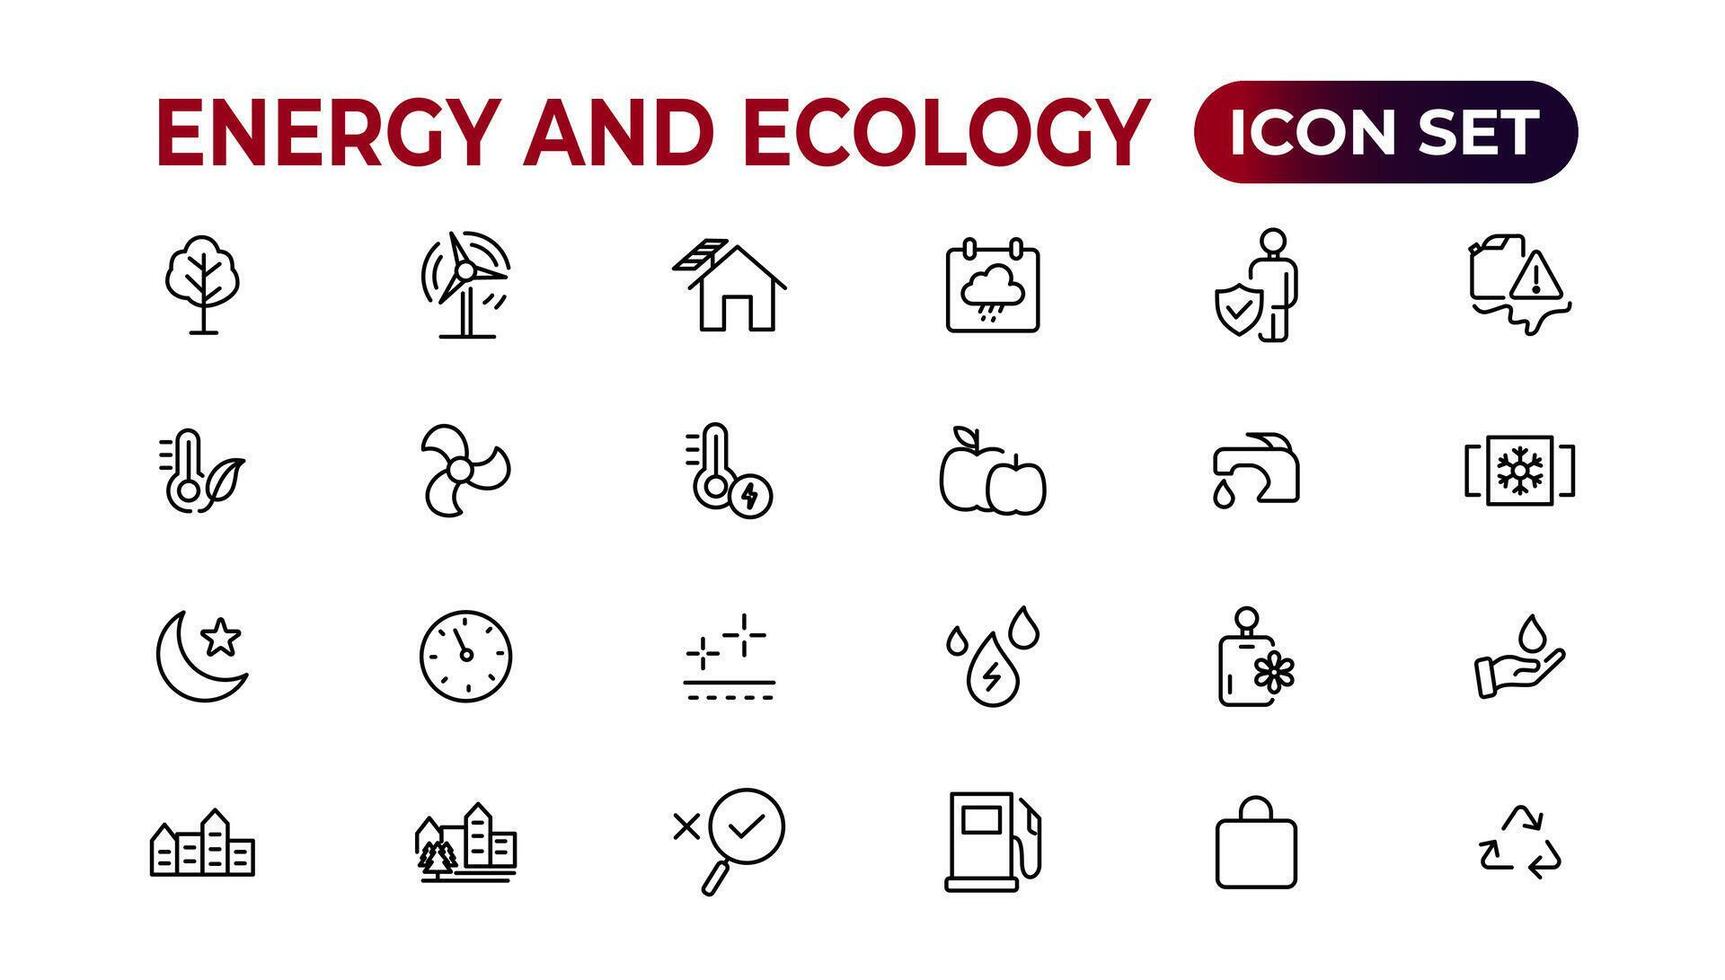 Energy and Ecology Line Editable Icons set. Vector illustration in modern thin line style of eco related icons. protection, planet care, natural recycling power. Pictograms and infographics.